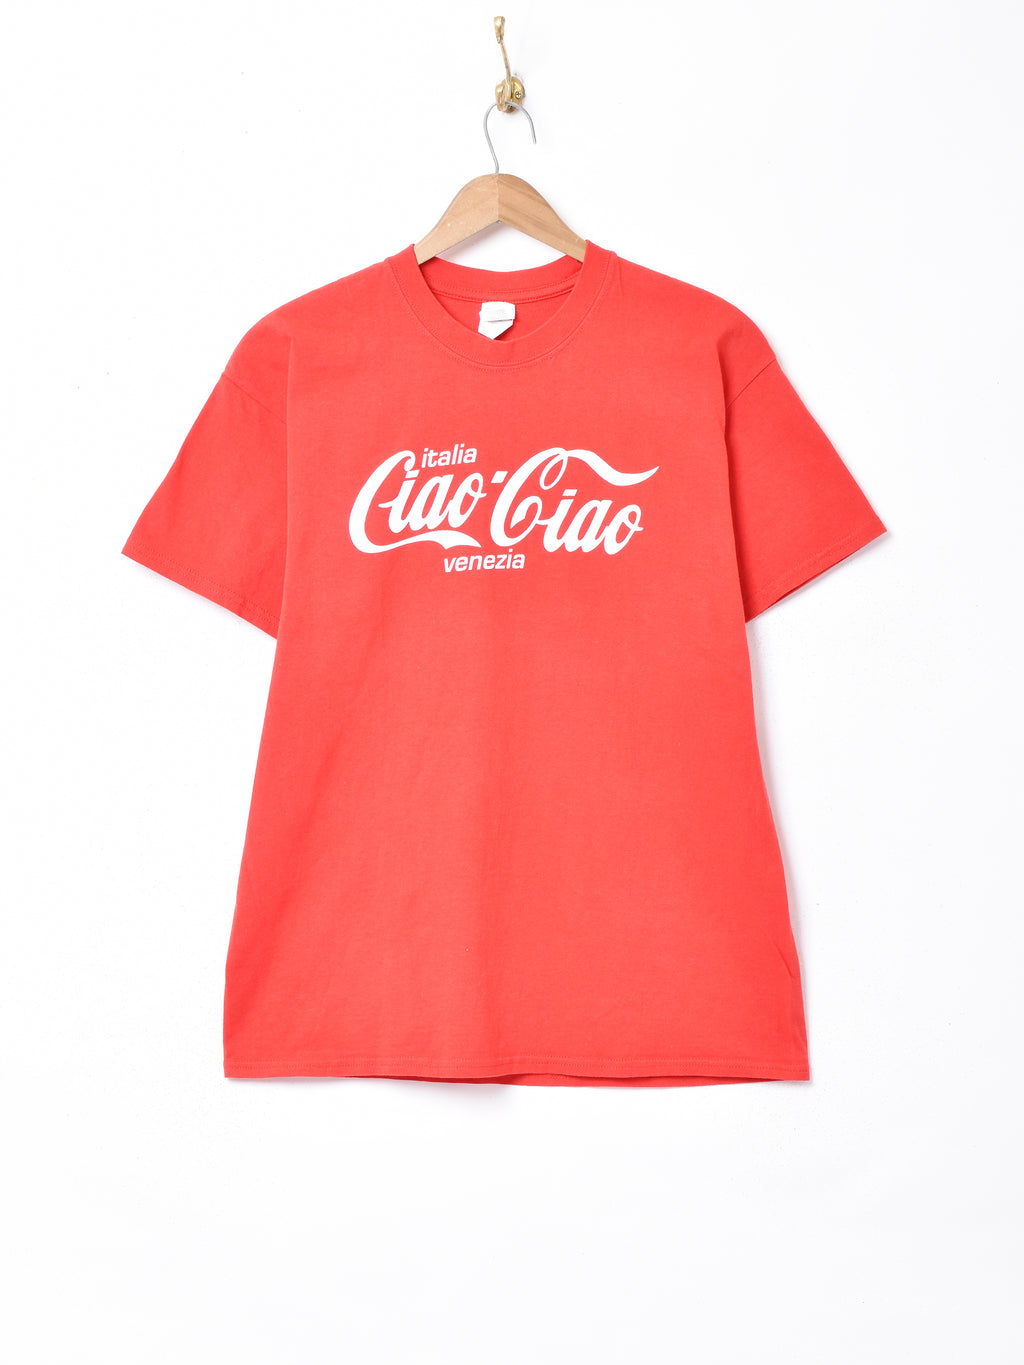 Coka Cola イタリア スーベニア プリントTシャツ – 古着屋Top of the